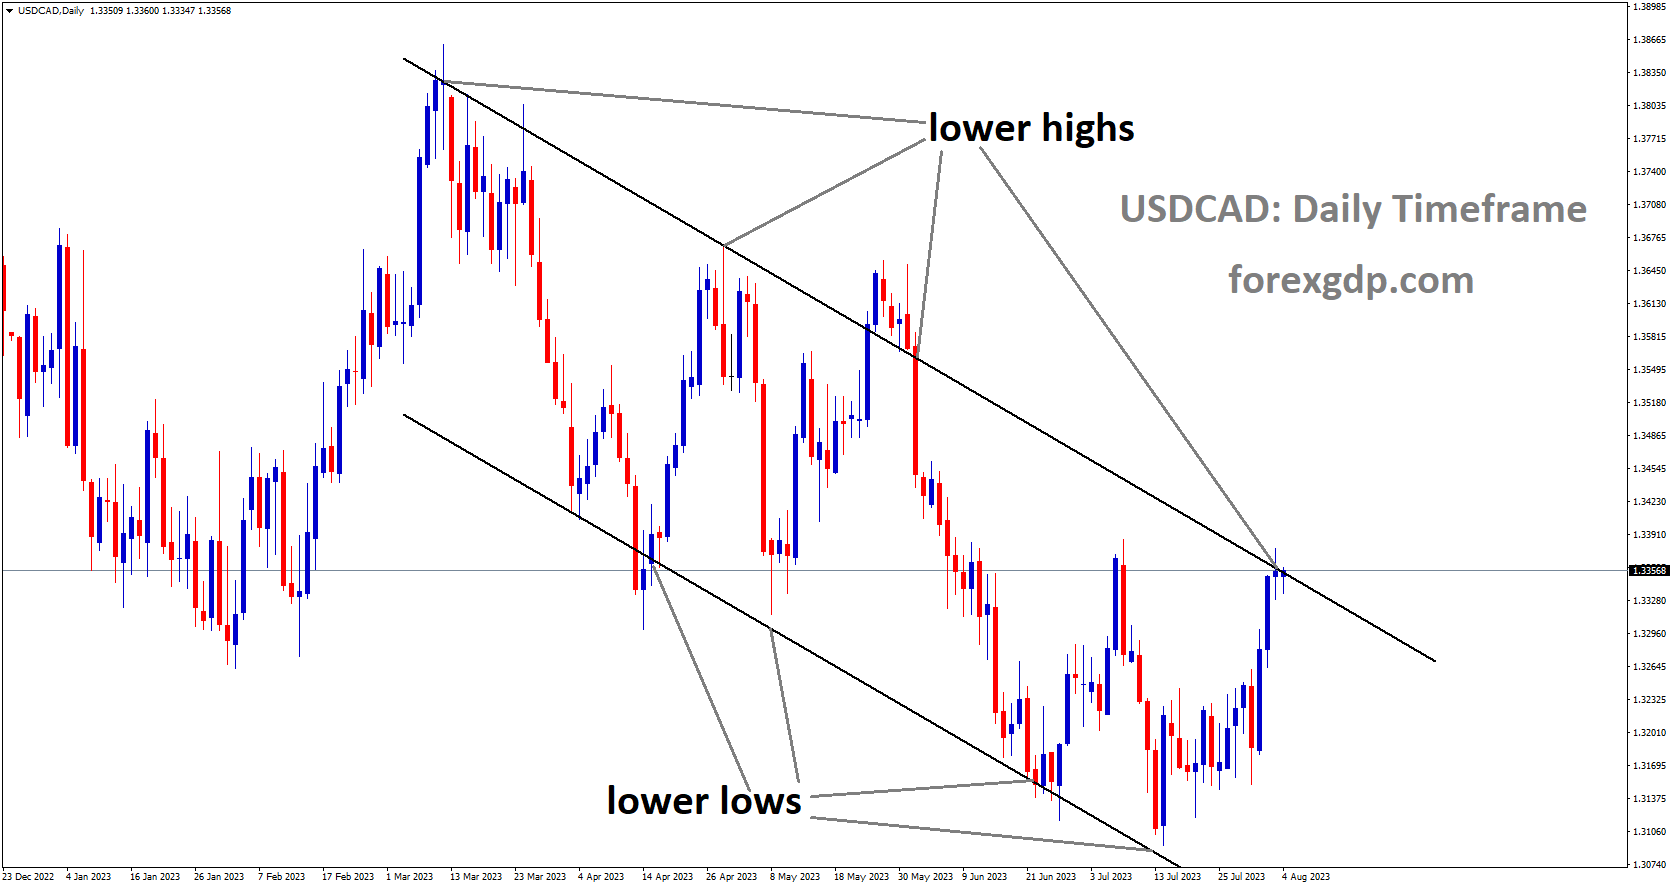 USDCAD is moving in Descending channel and market has reached lower high area of the channel.